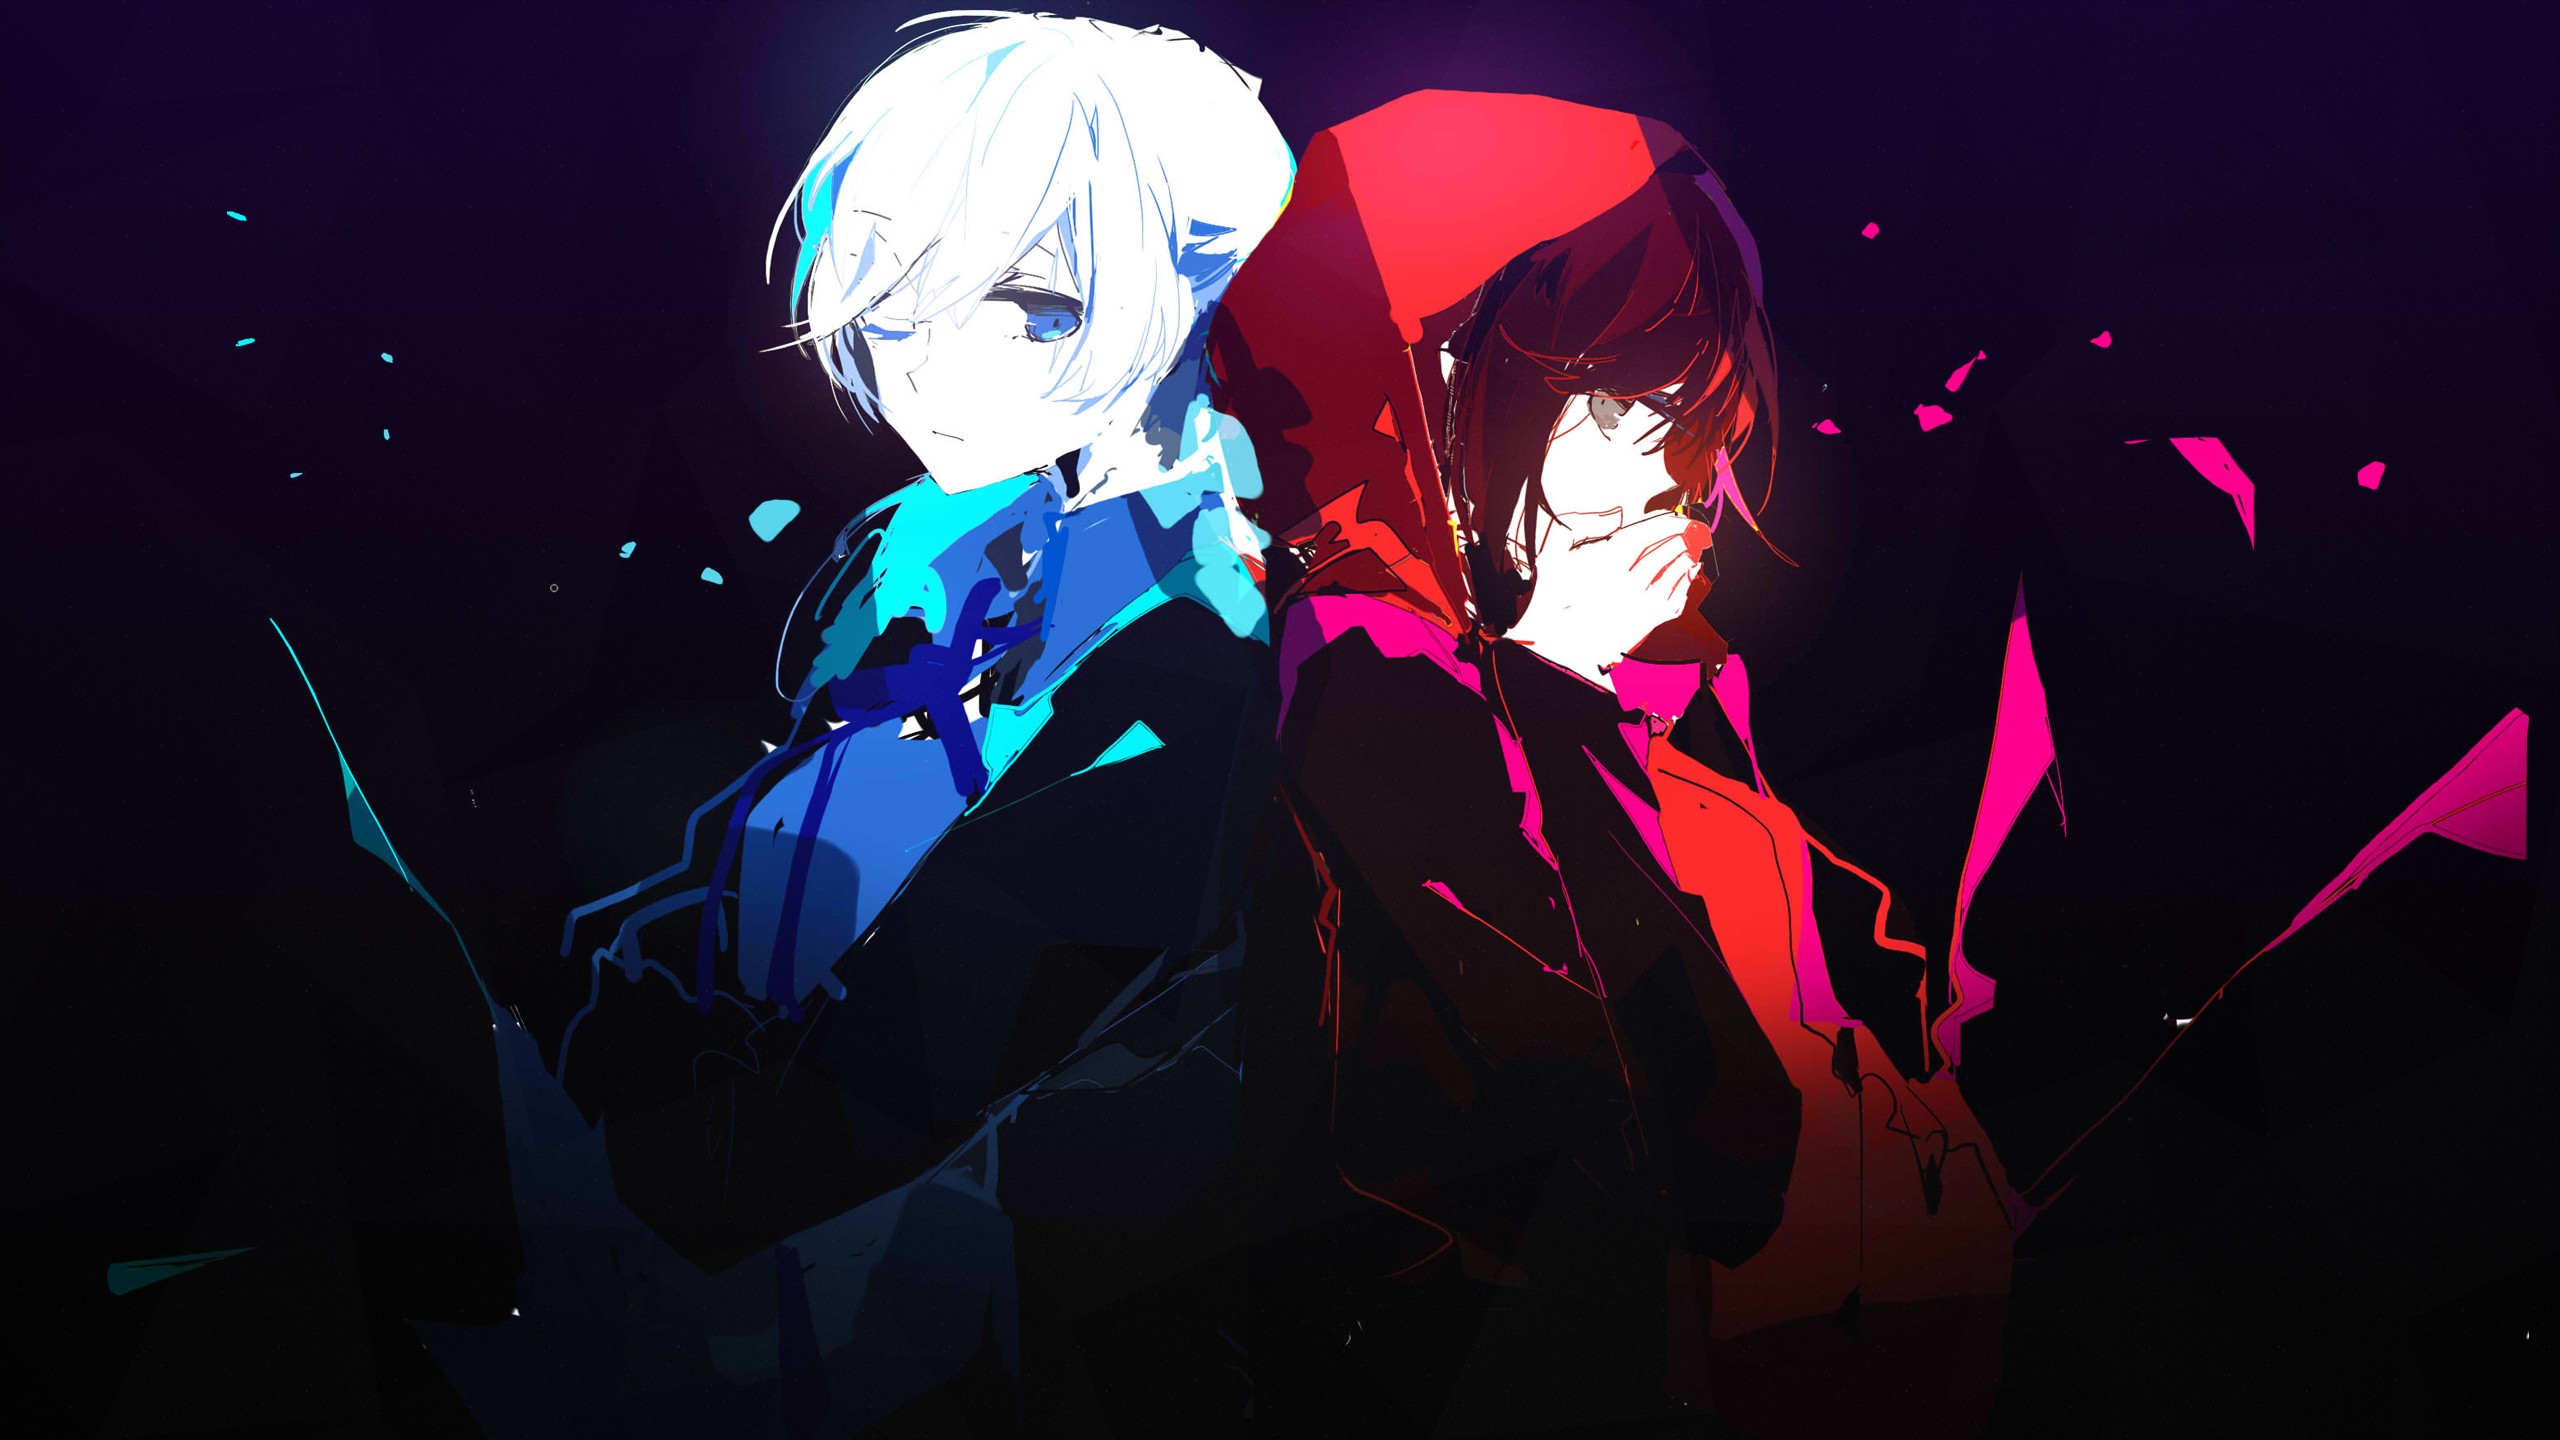 Anime Girls RWBY Weiss Schnee Ruby Rose Character Anime 2560x1440